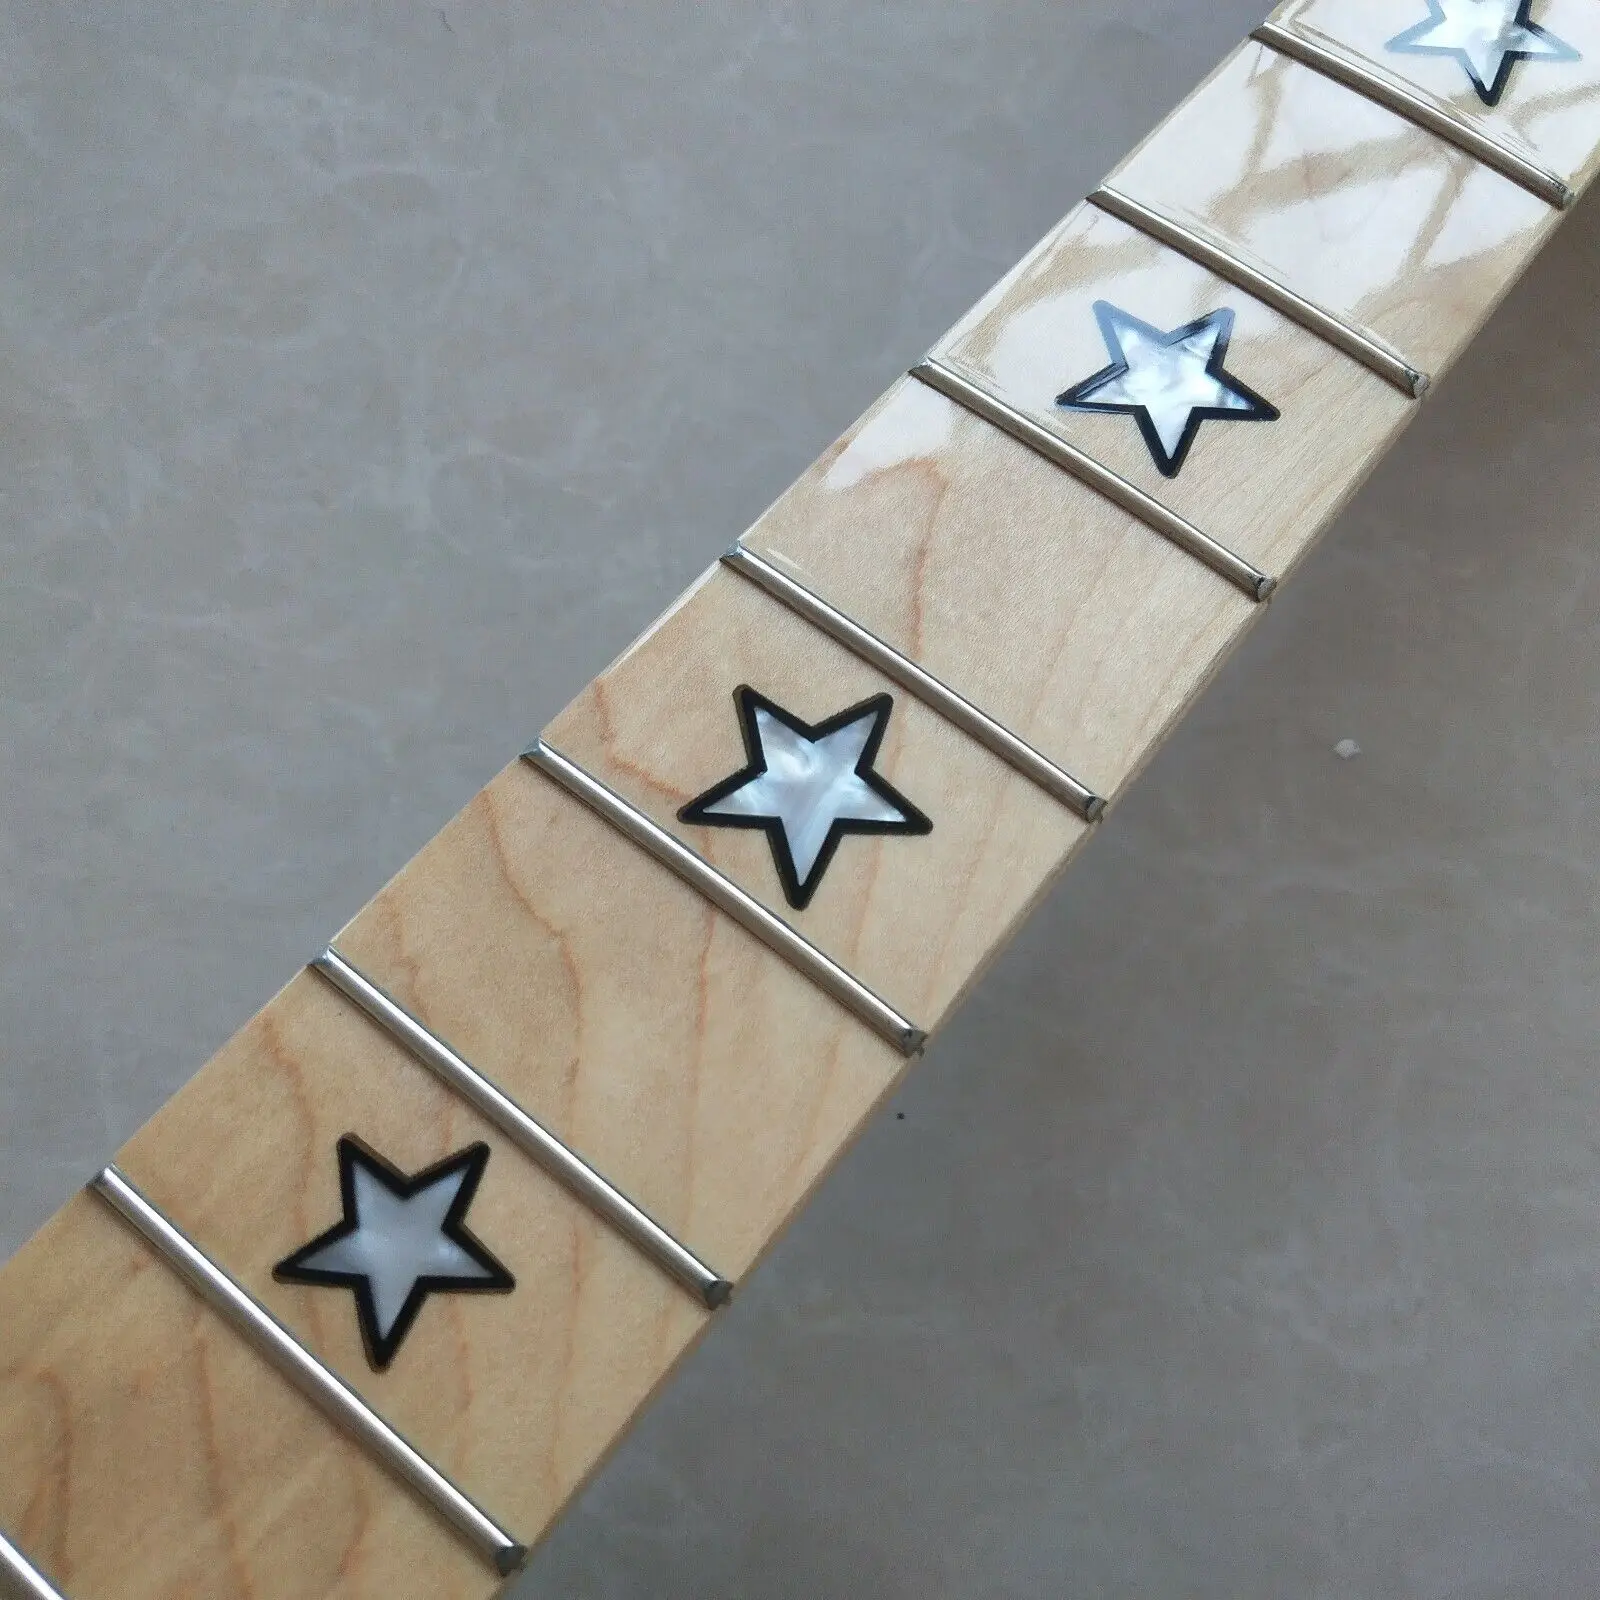 Star Inlay Maple Gloss Electric Guitar Neck Parts 22 fret 25.5in Maple Fretboard enlarge